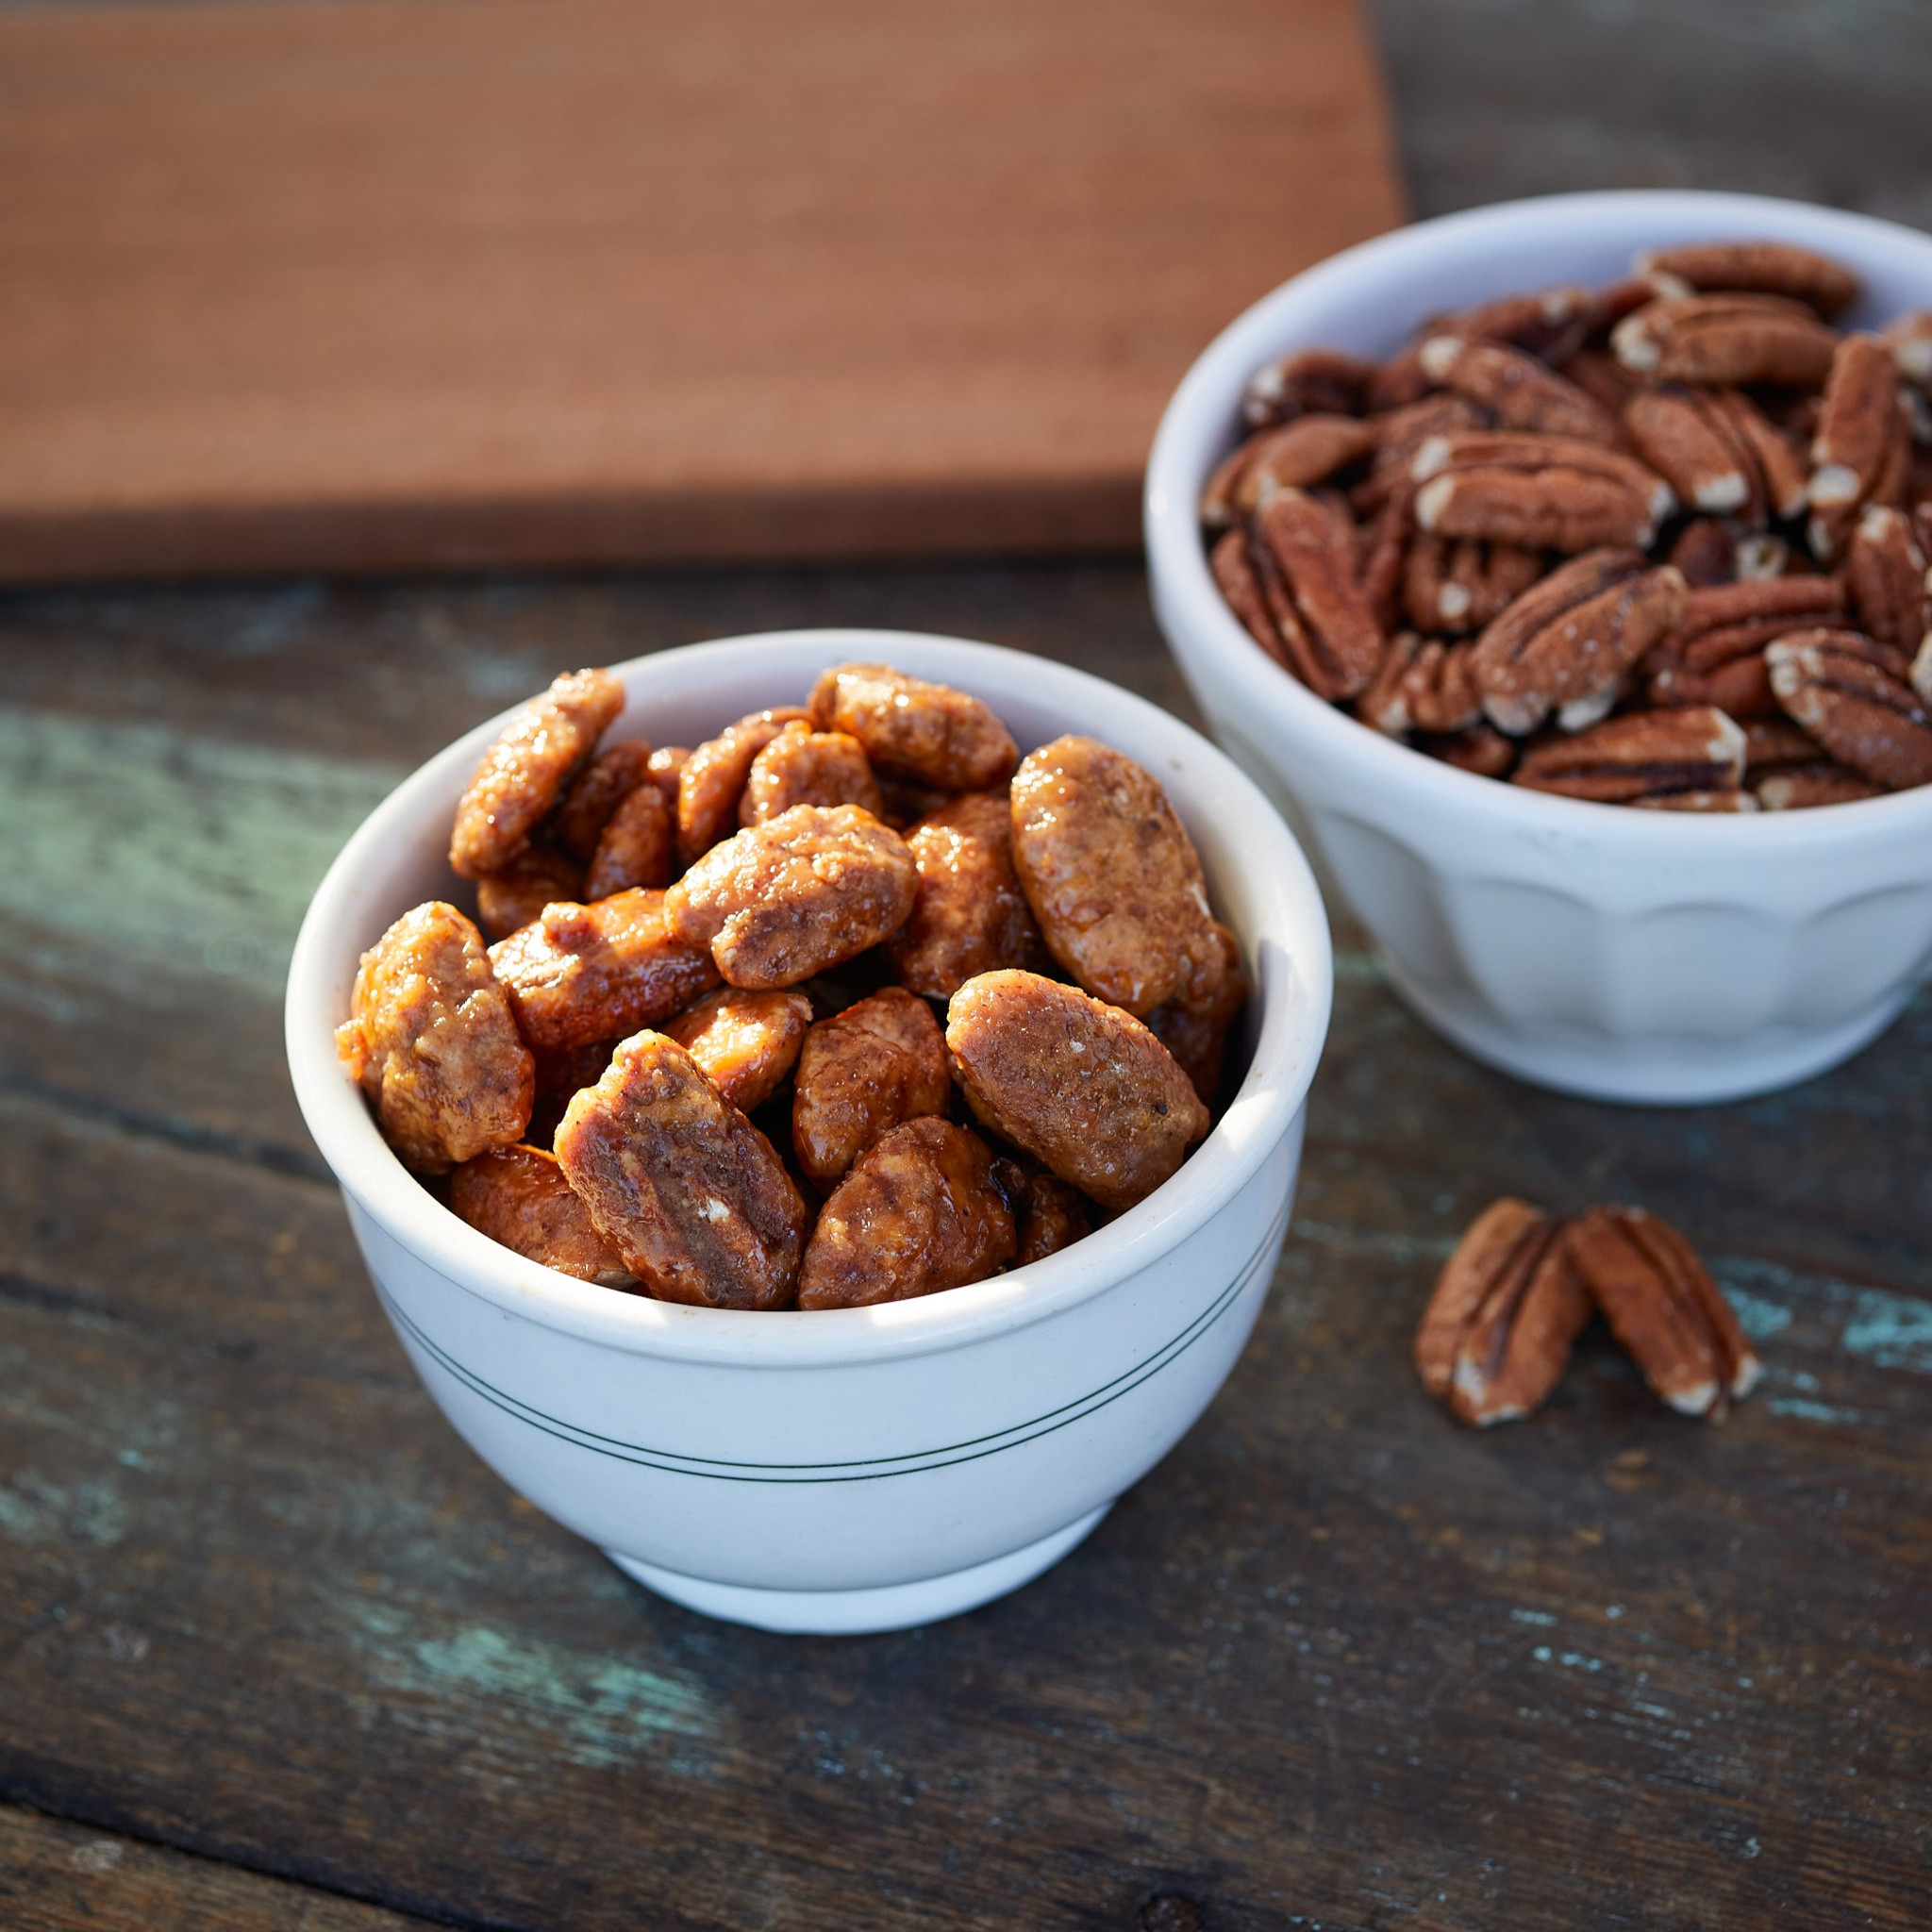 Honey glazed pecans are the perfect afternoon snack.